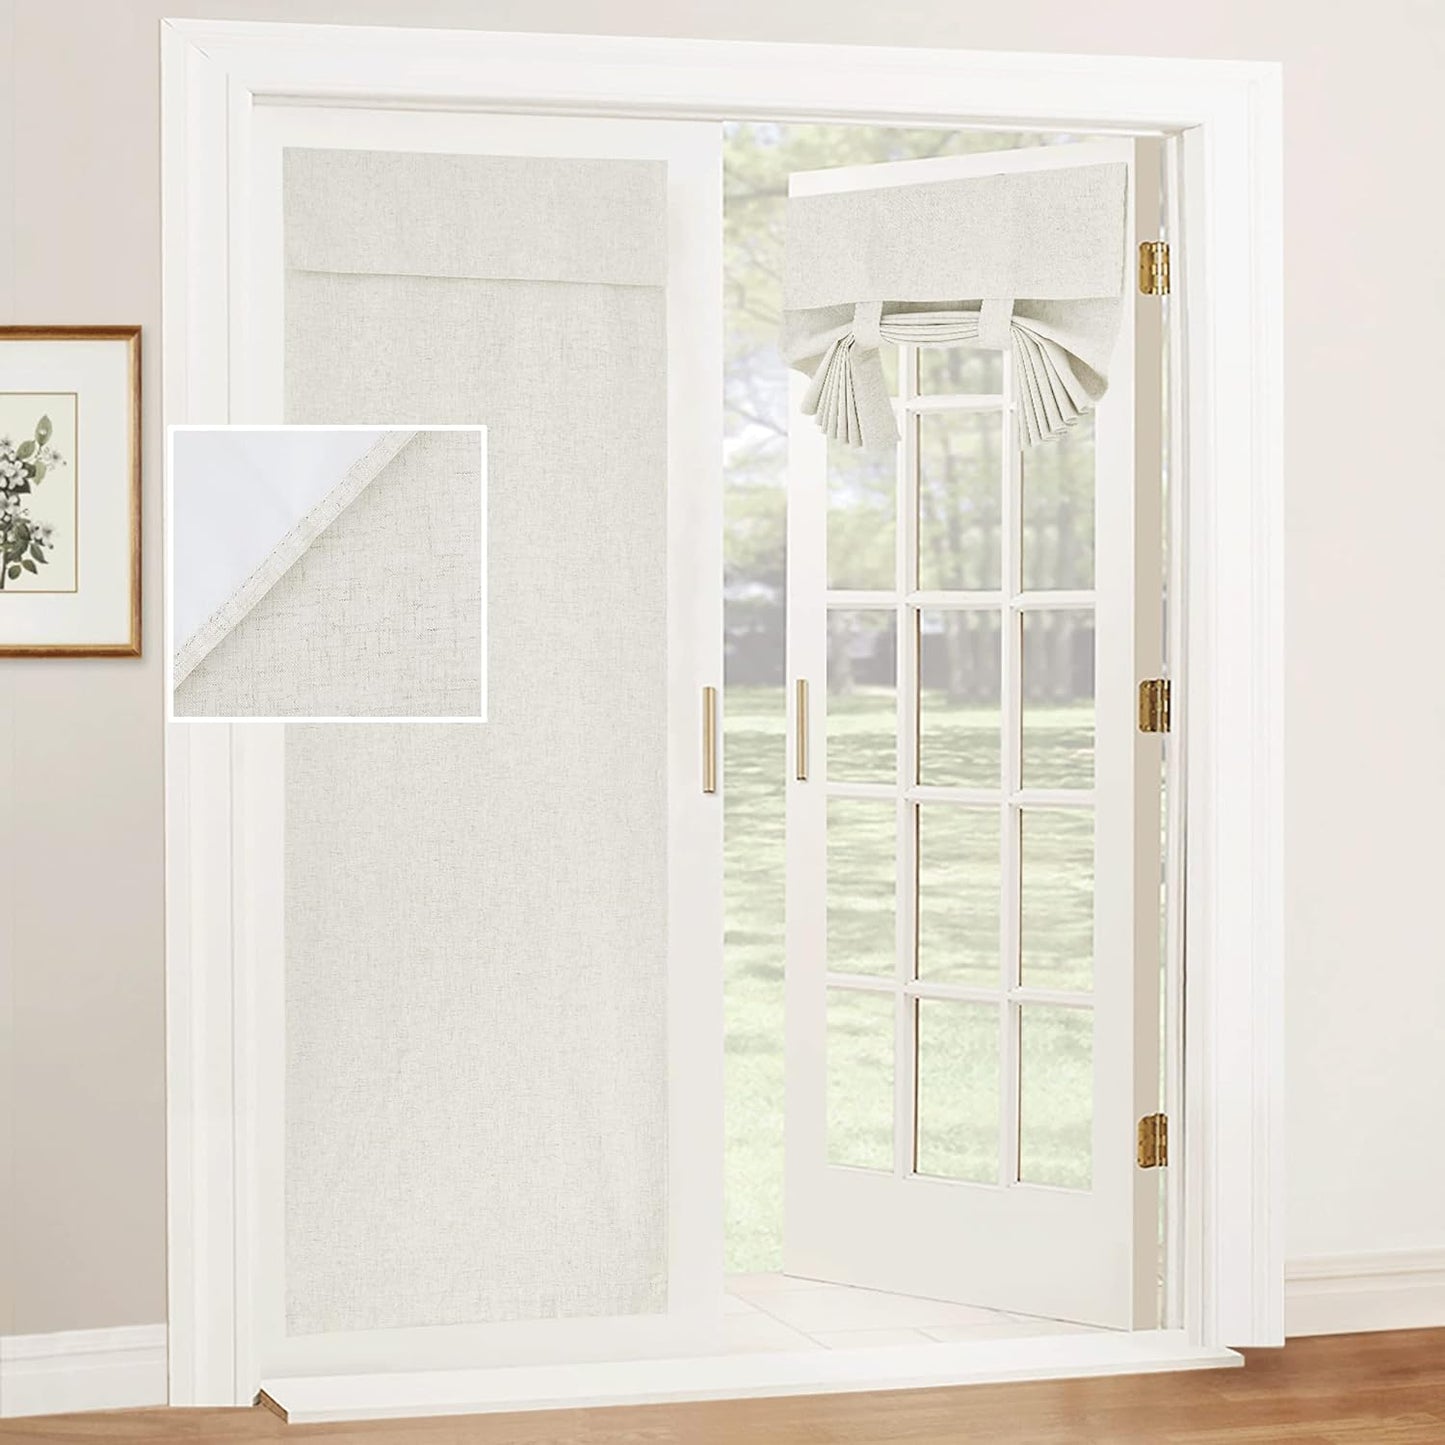 RYB HOME Blackout French Door Curtains, Room Darkening Shades Small Door Window Curtains and Drapes Thermal Insulated Tricia Door Blinds for Patio Door Doorway, W26 X L40 Inch, 1 Panel, Gray  RYB HOME Linen 26" X 69" 